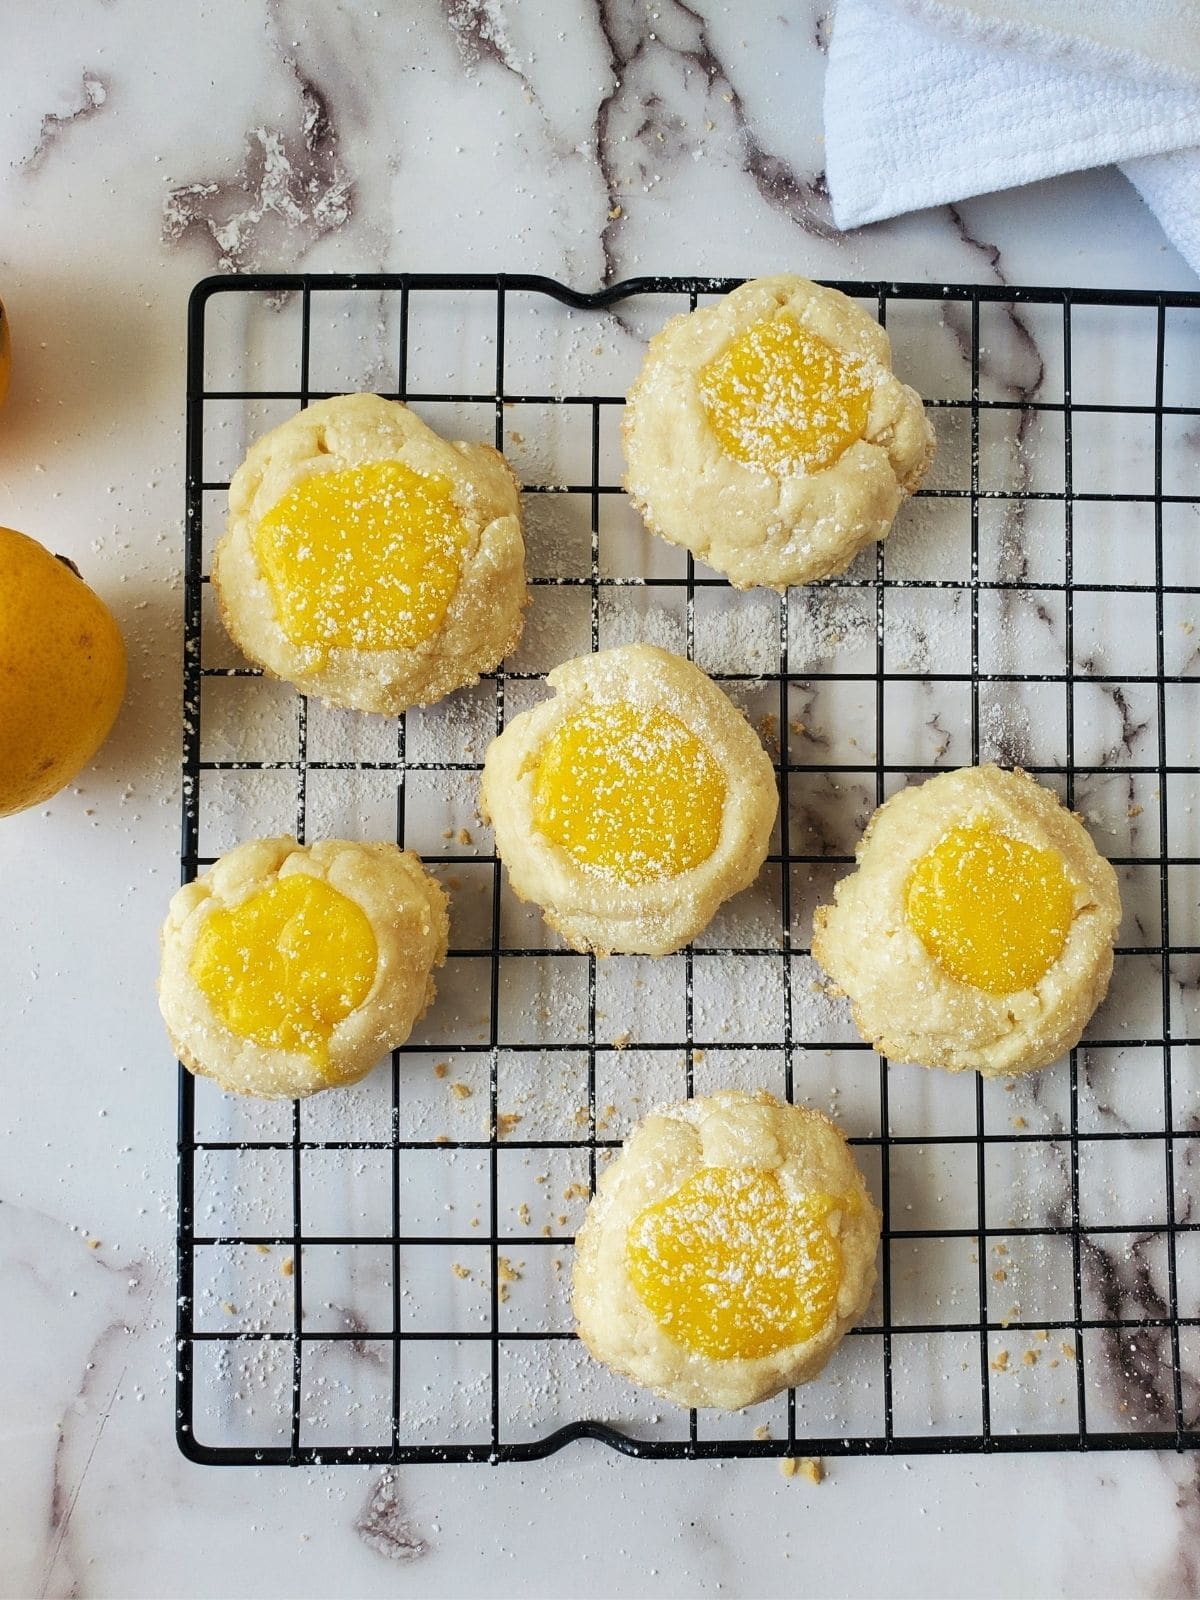 A wire rack filled with lemon curd cookies. The cookies are dusted with powdered sugar.